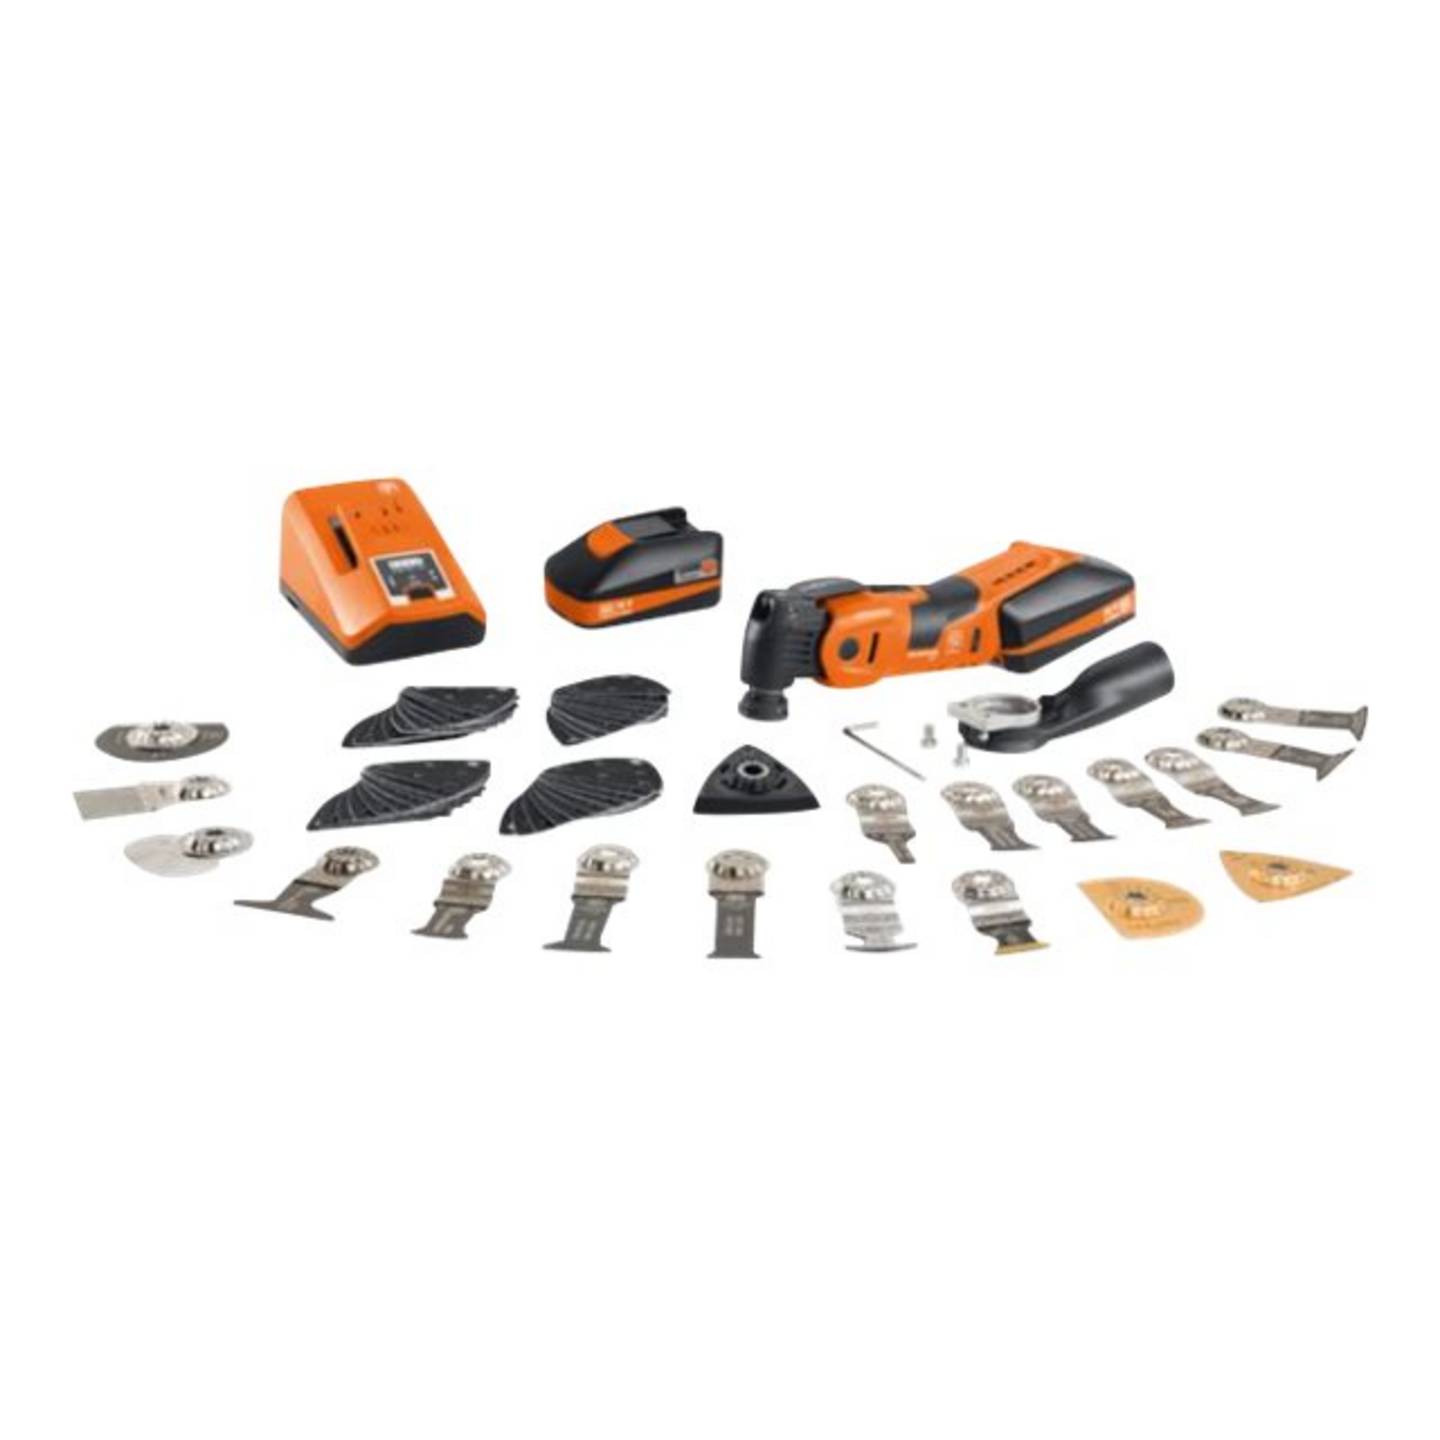 ▻ FEIN 500 Video 329,37€ ab AMM Toolbrothers Testbericht, | Plus AS Top 4.0 Ah | Multifunktionswerkzeug